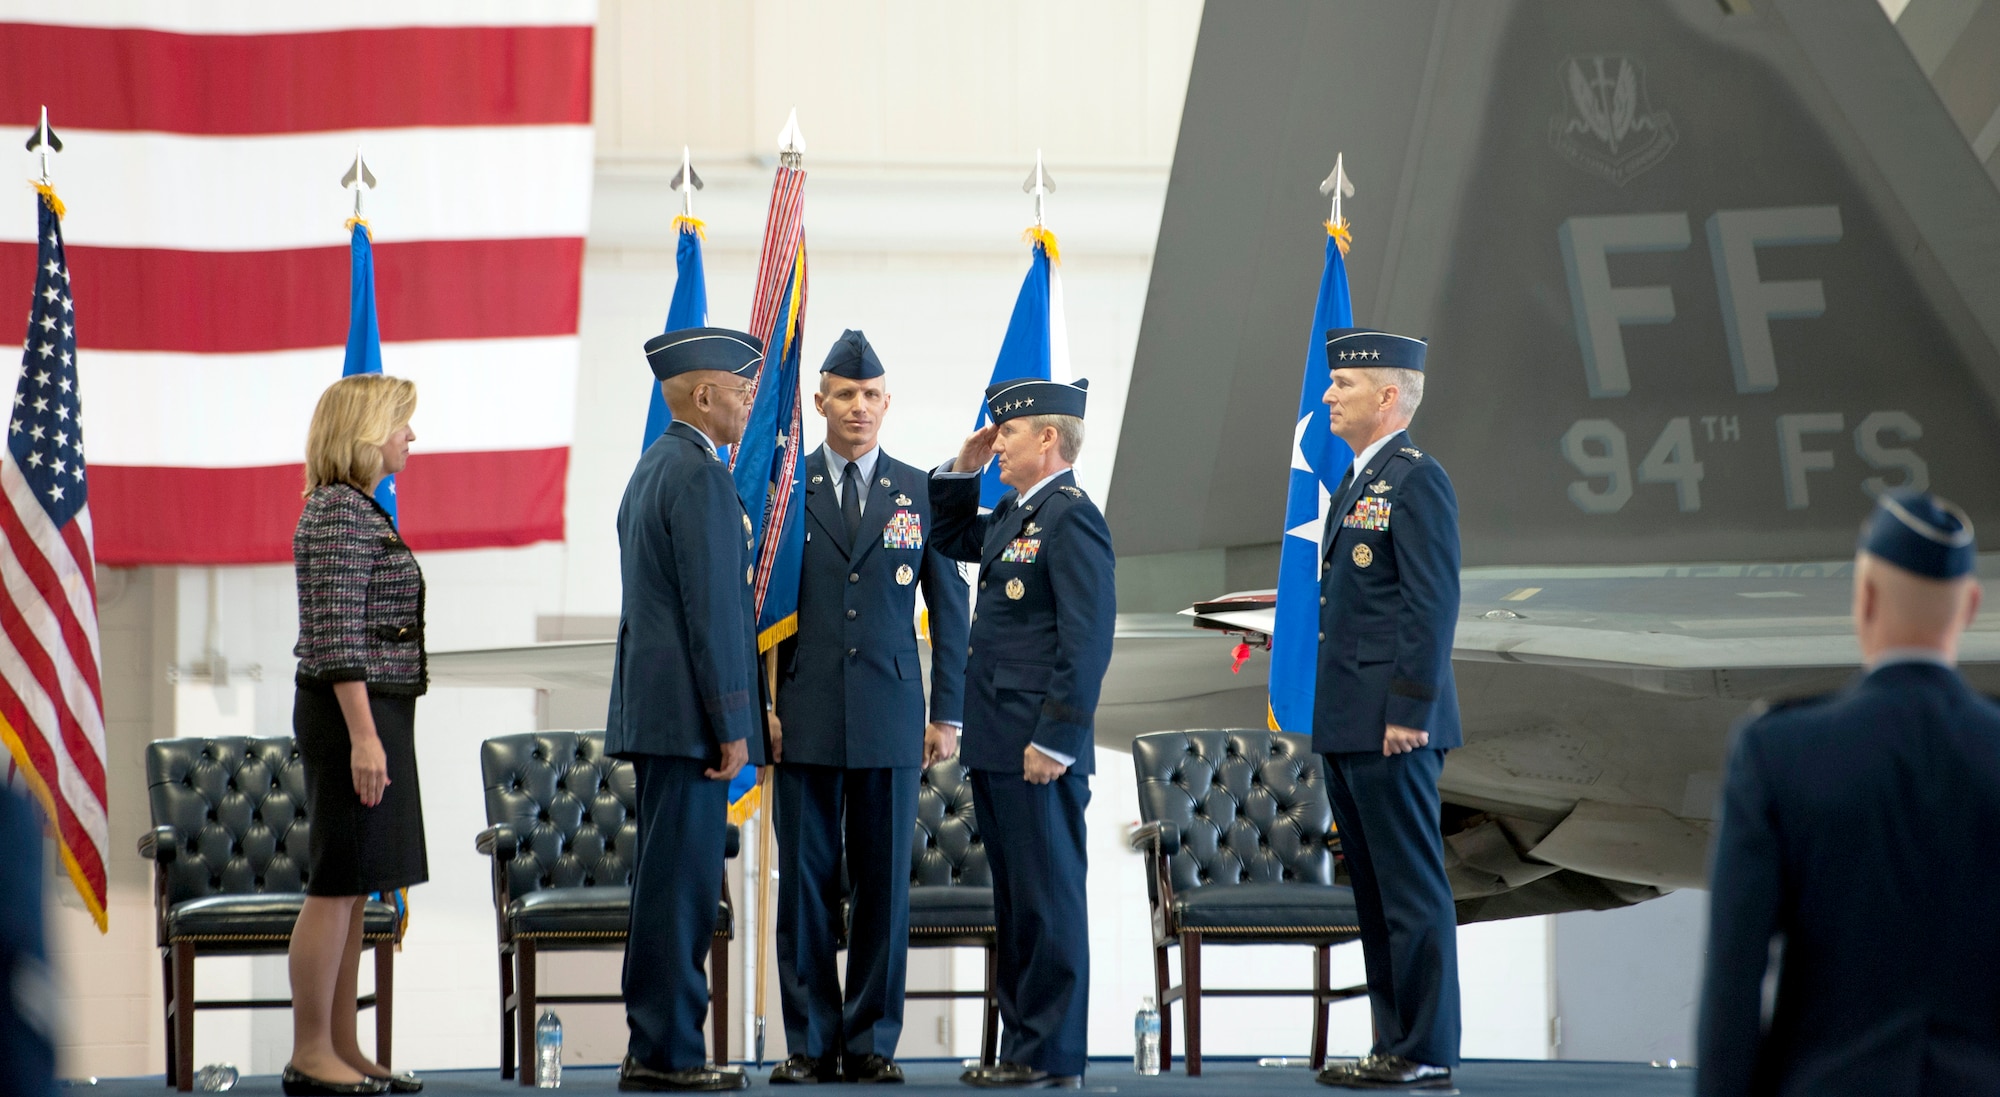 Secretary of the Air Force Deborah Lee James and U.S. Air Force Vice Chief of Staff Gen. Larry O. Spencer welcome Gen. Hawk Carlisle as commander of Air Combat Command during the change of command ceremony at Langley Air Force Base, Va., Nov. 4, 2014.  Prior to taking the reins as commander ACC Carlisle led the Pacific Air Forces from August 2012 to October 2014. (U.S. Air Force photo by Sachel Seabrook/Released)